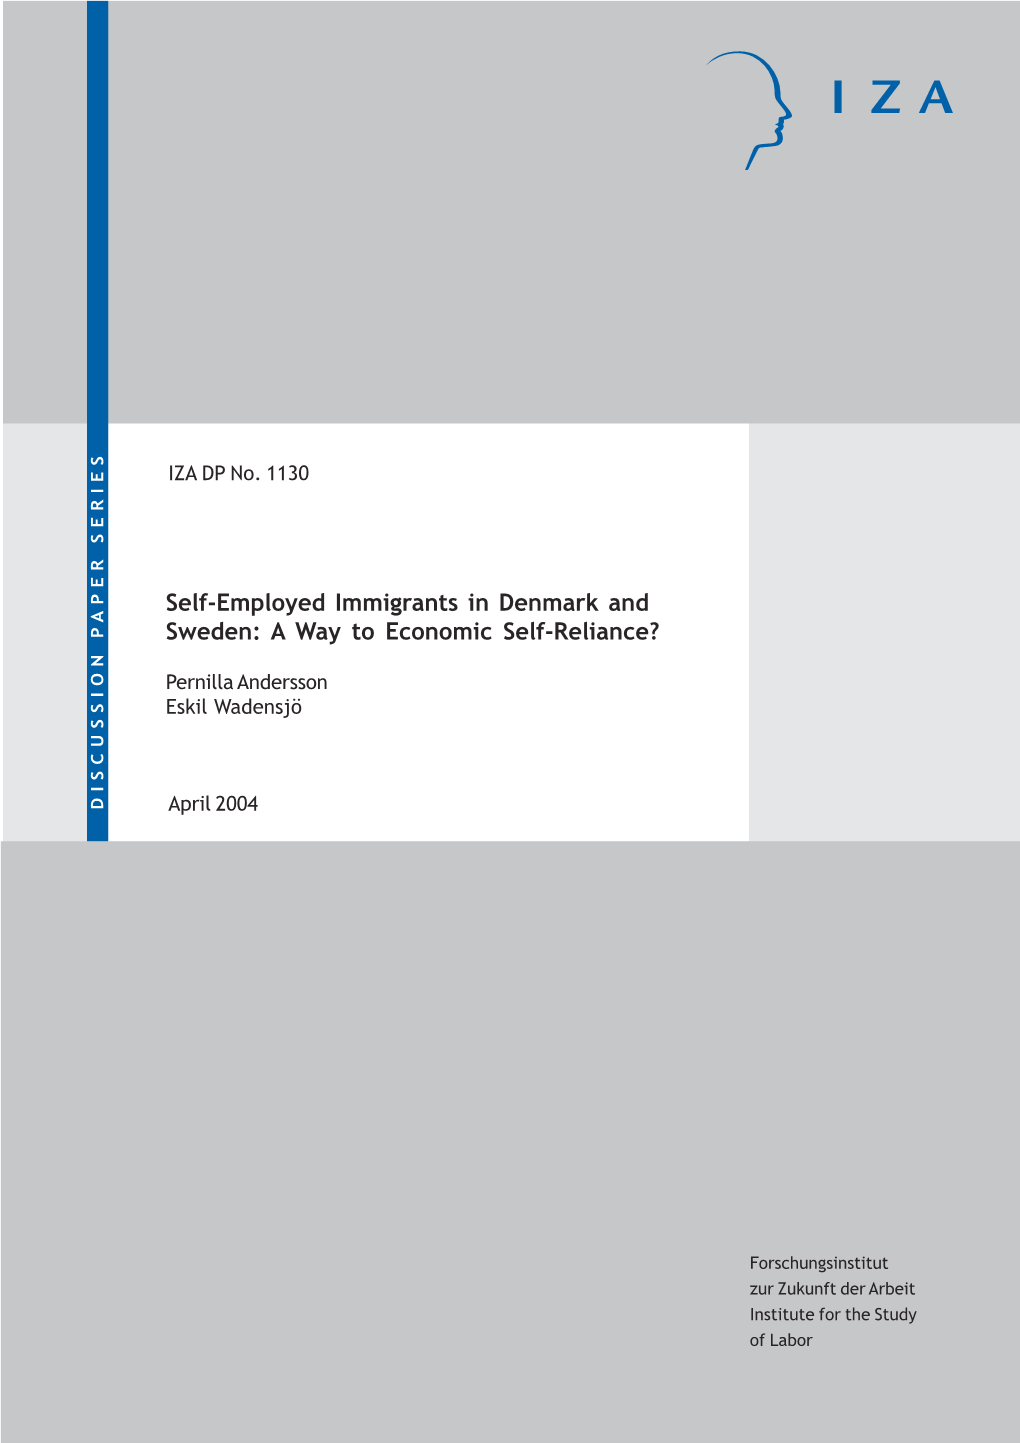 Self-Employed Immigrants in Denmark and Sweden: a Way to Economic Self-Reliance?